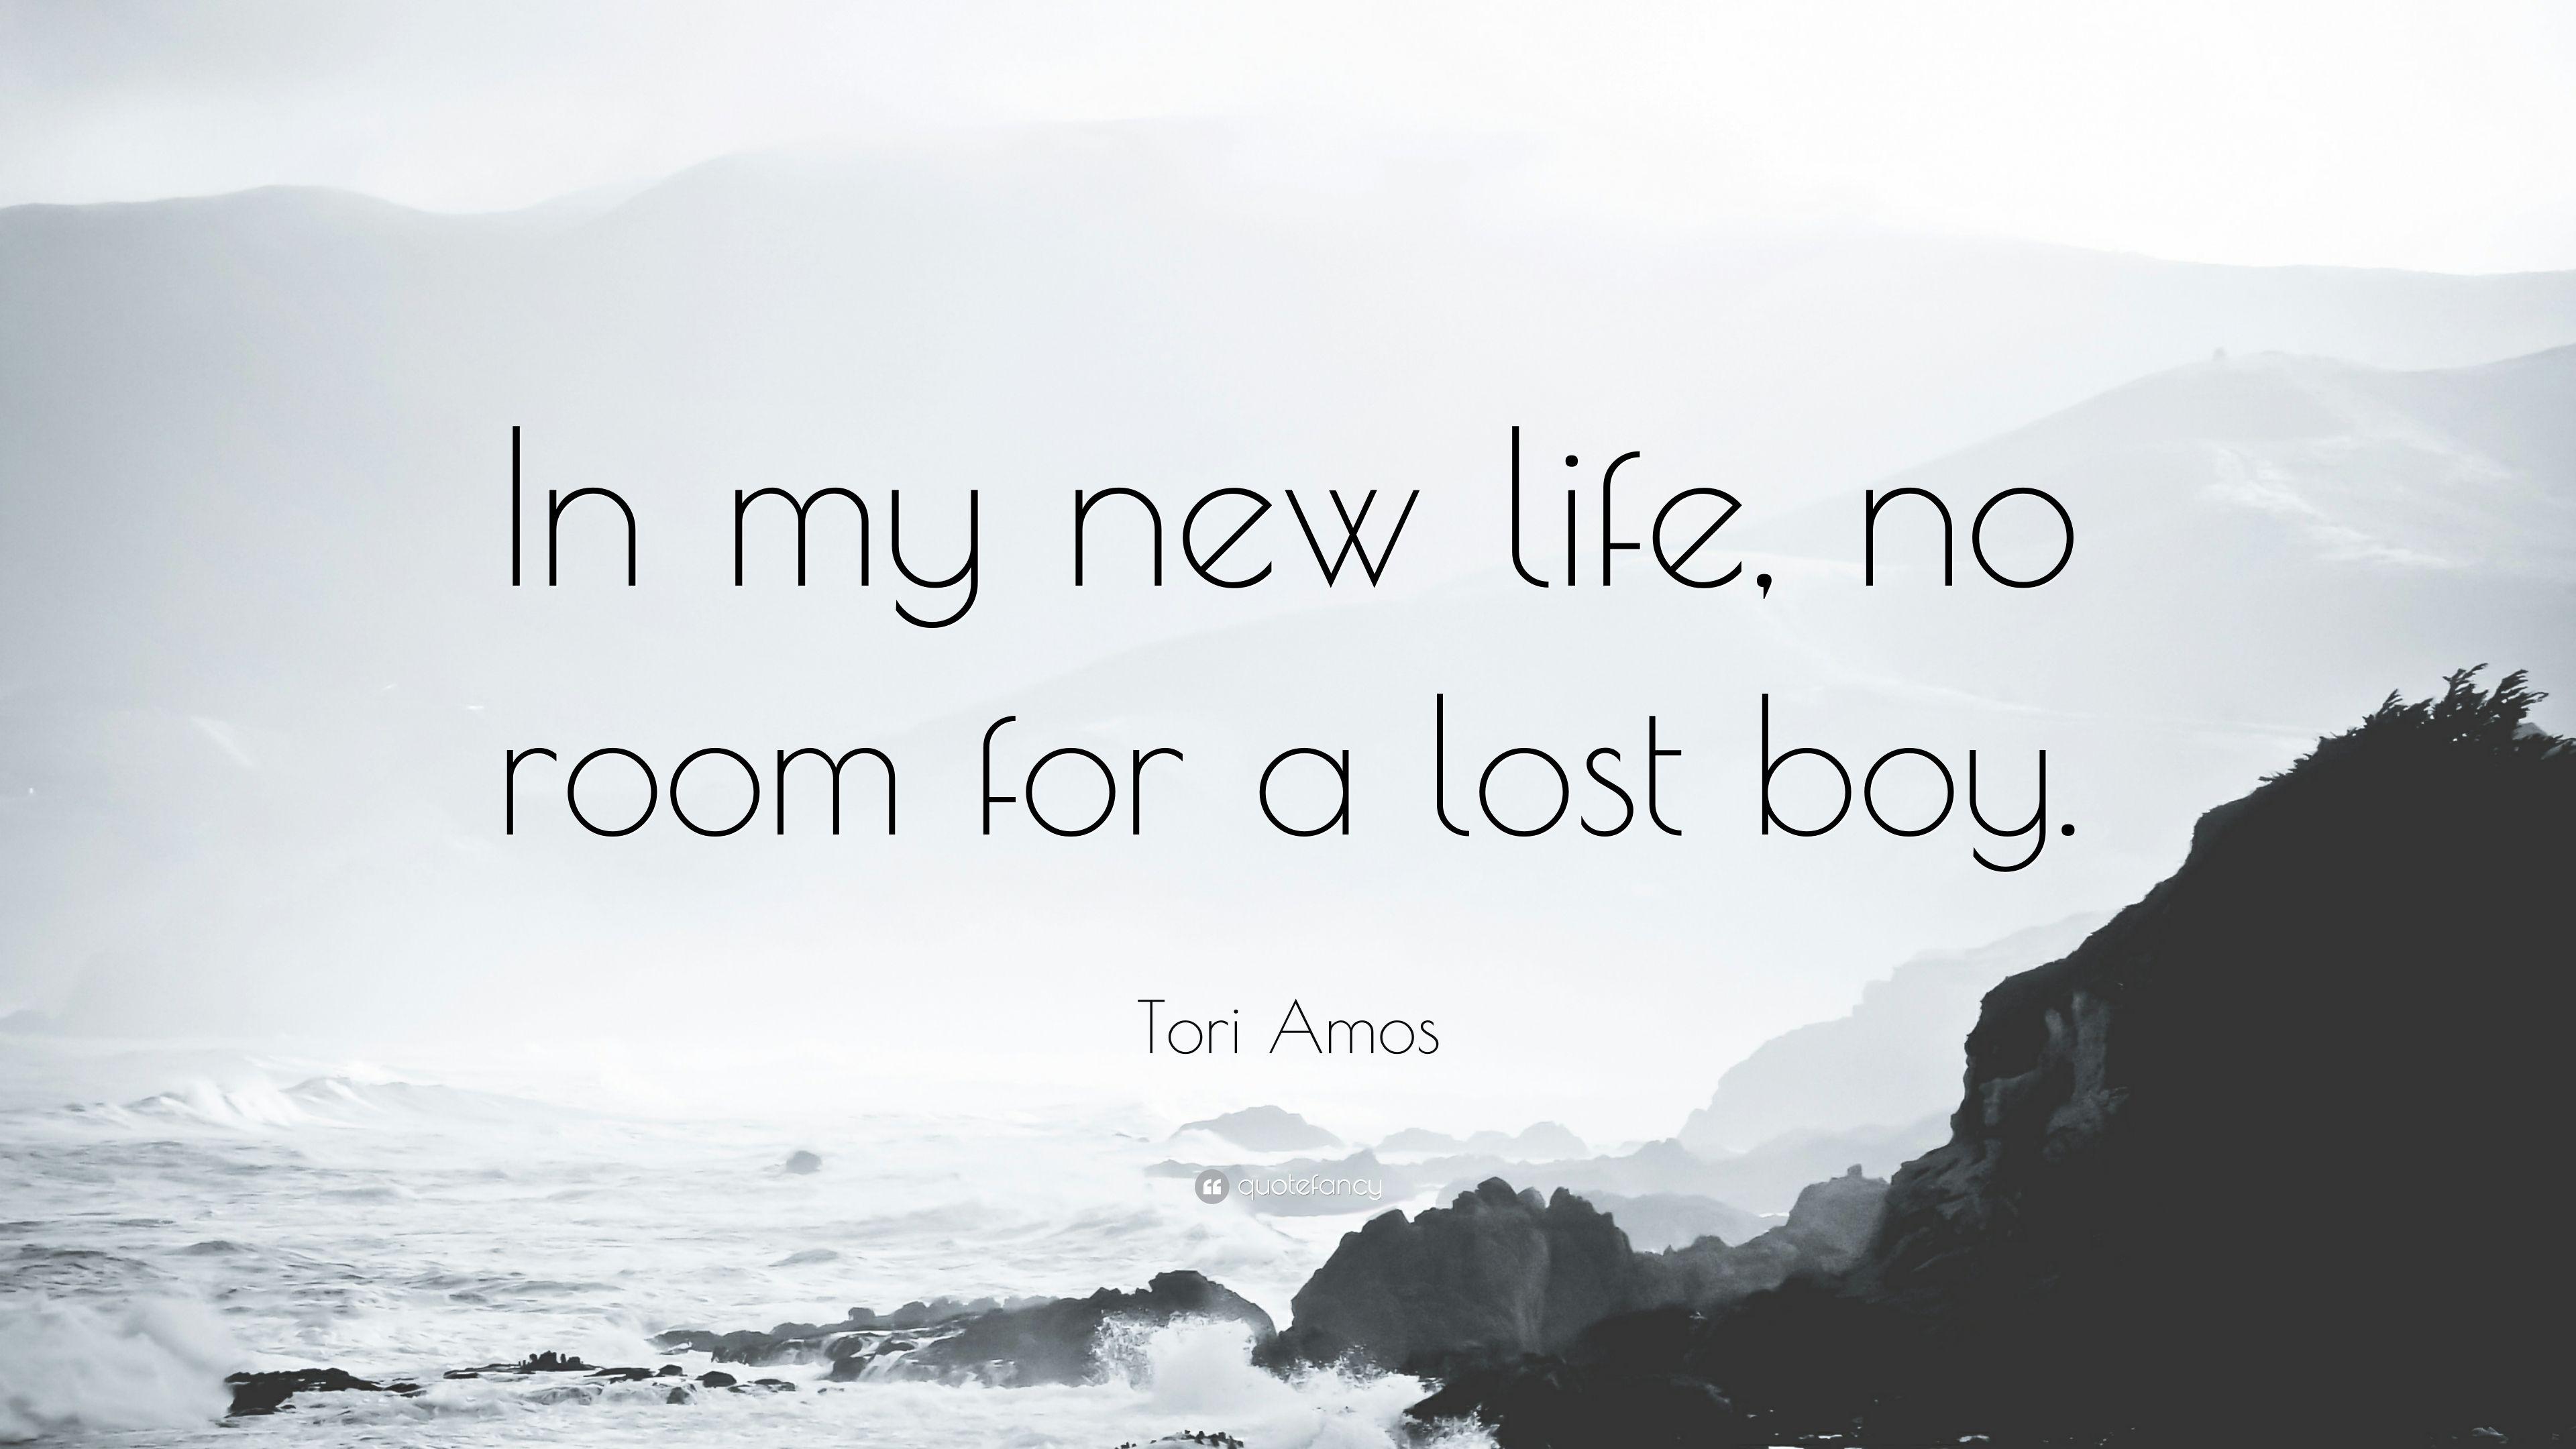 Tori Amos Quote: “In my new life, no room for a lost boy.” 9